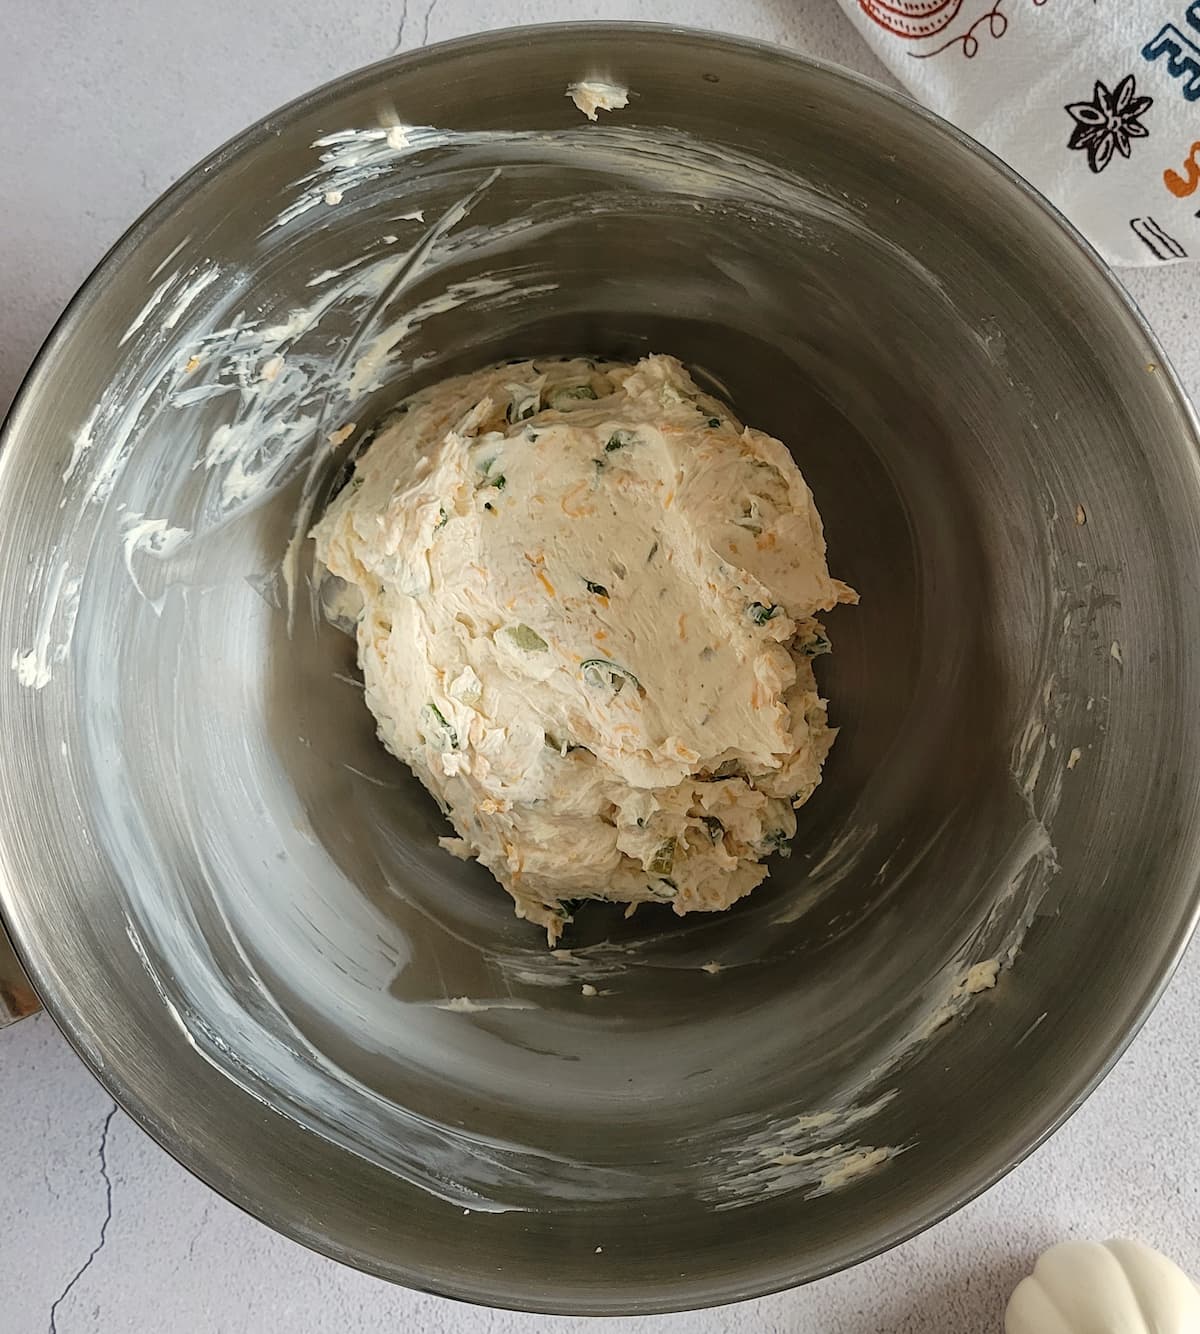 cream cheese and other ingredients mixed into a ball in a bowl